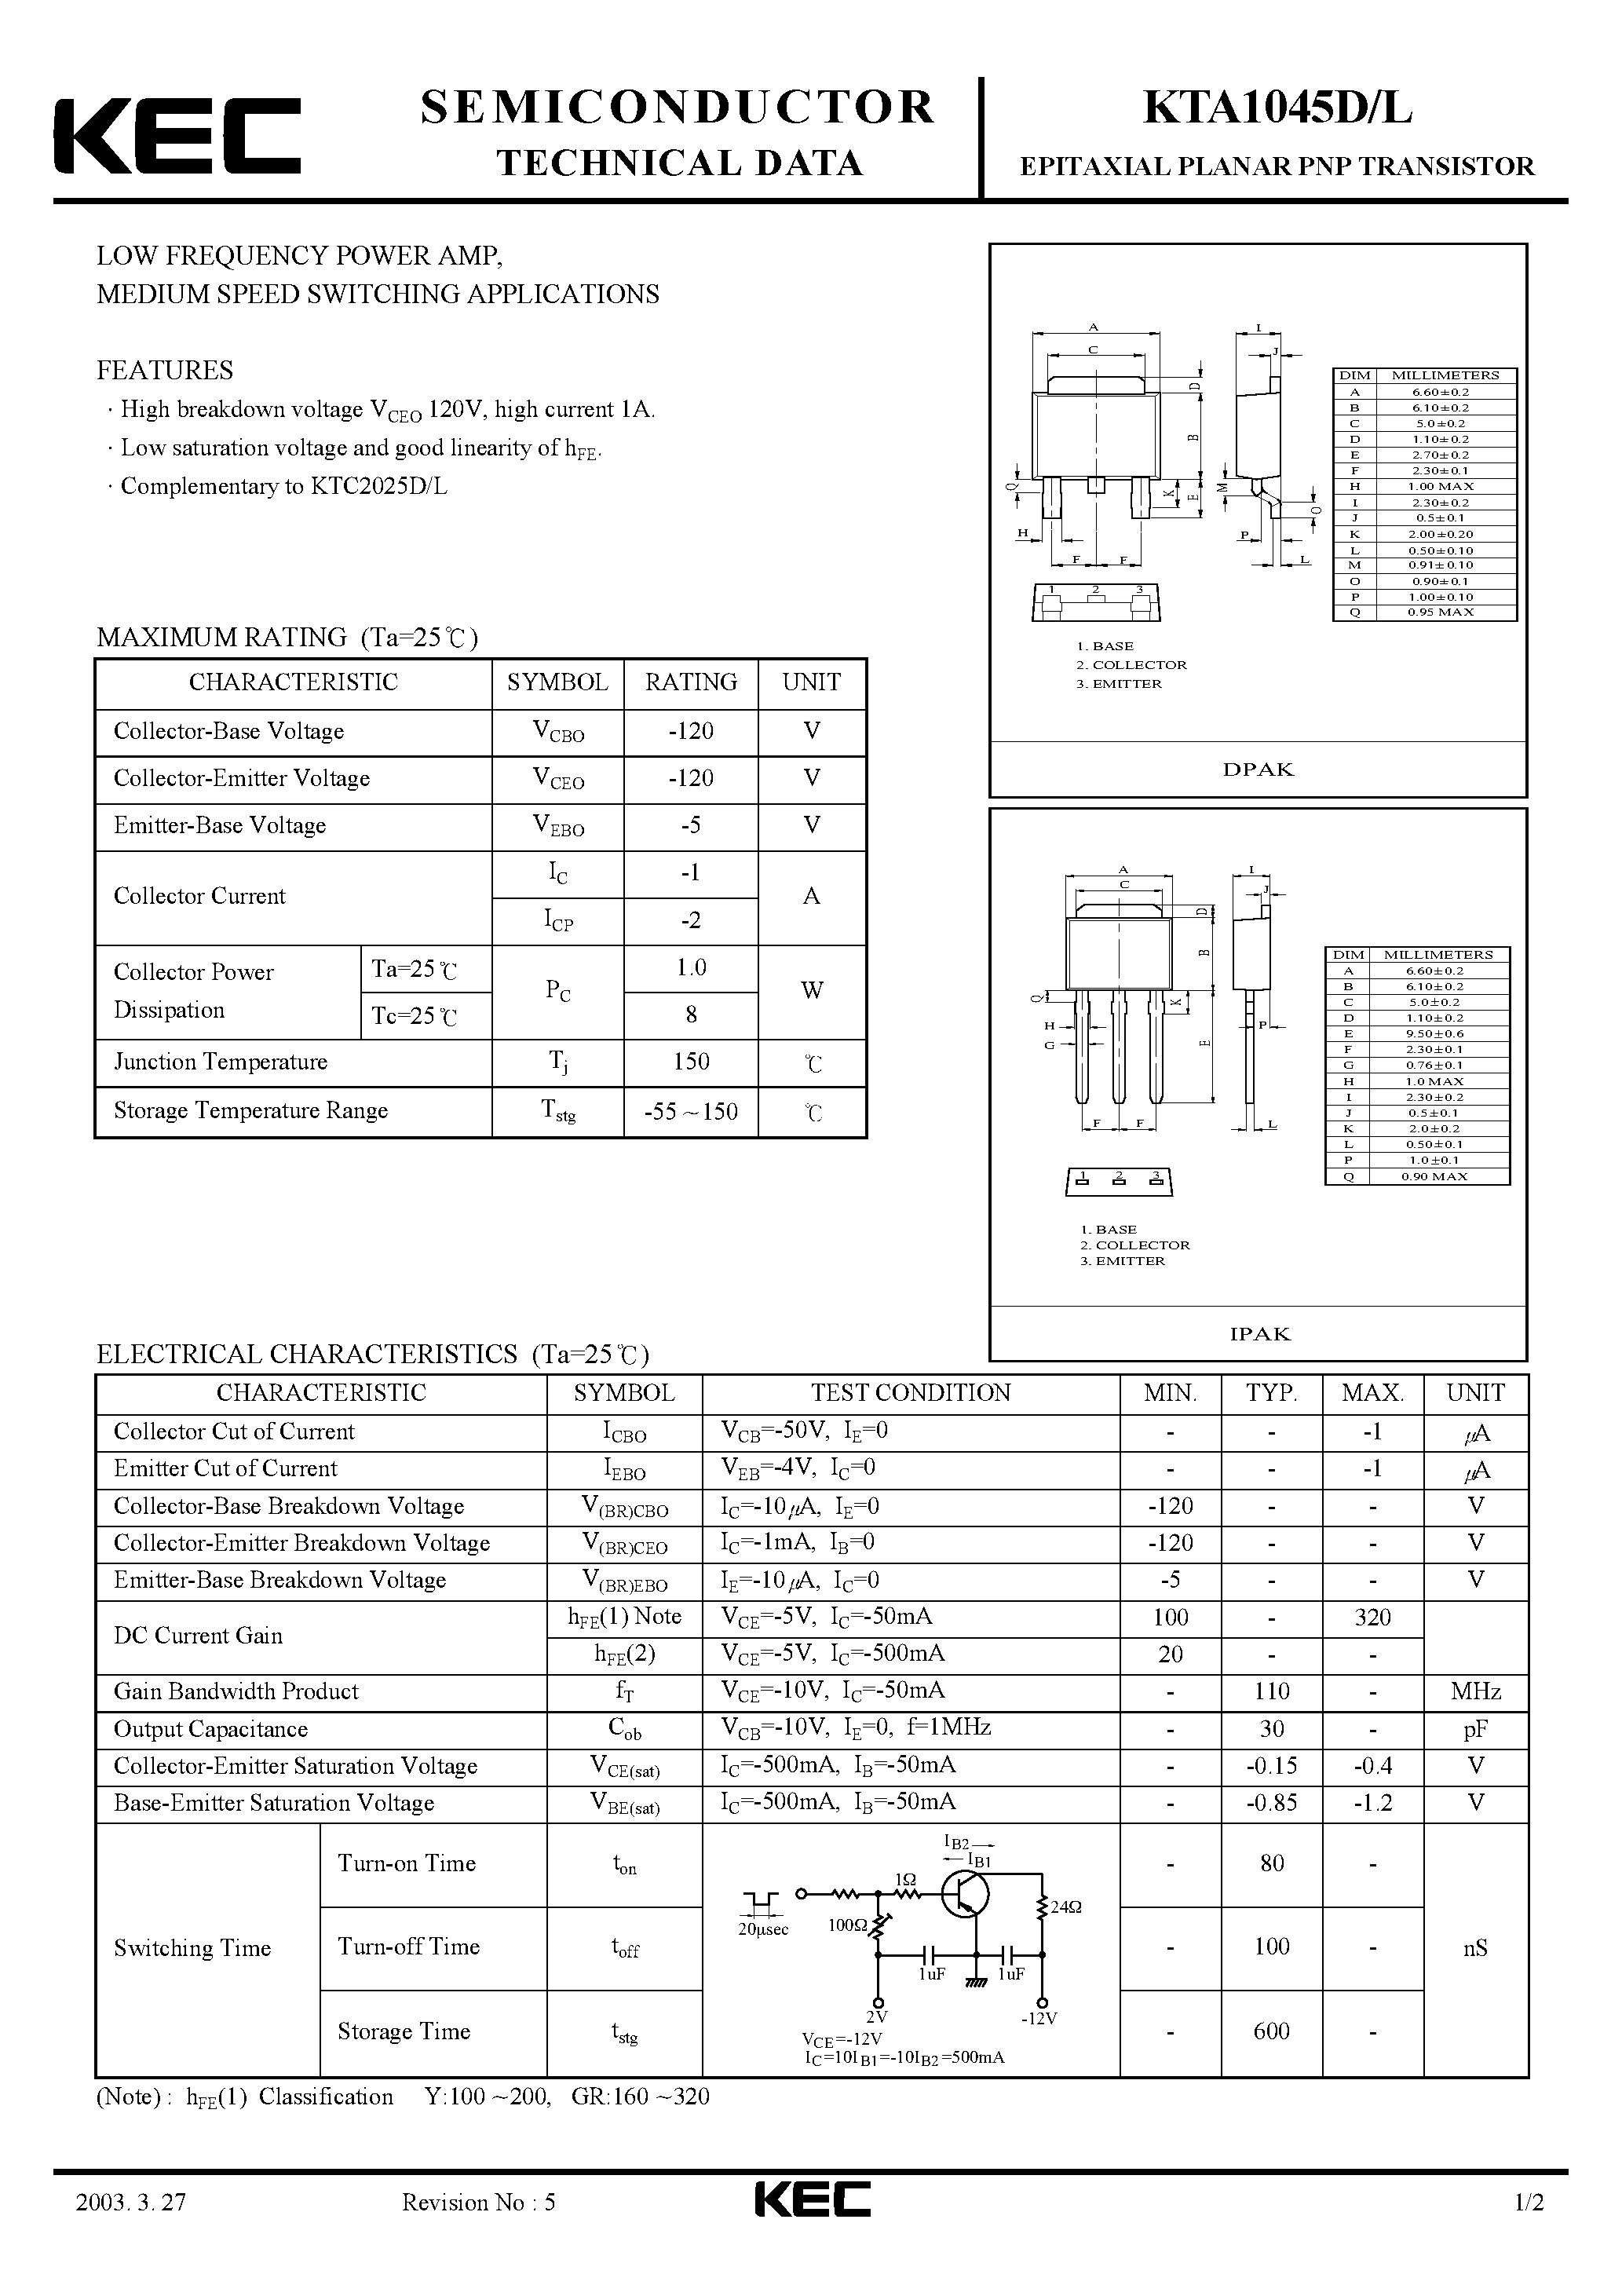 Даташит KTA1045L - EPITAXIAL PLANAR PNP TRANSISTOR (LOW FREQUENCY POWER AMP/ MEDIUM SPEED SWITCHING) страница 1